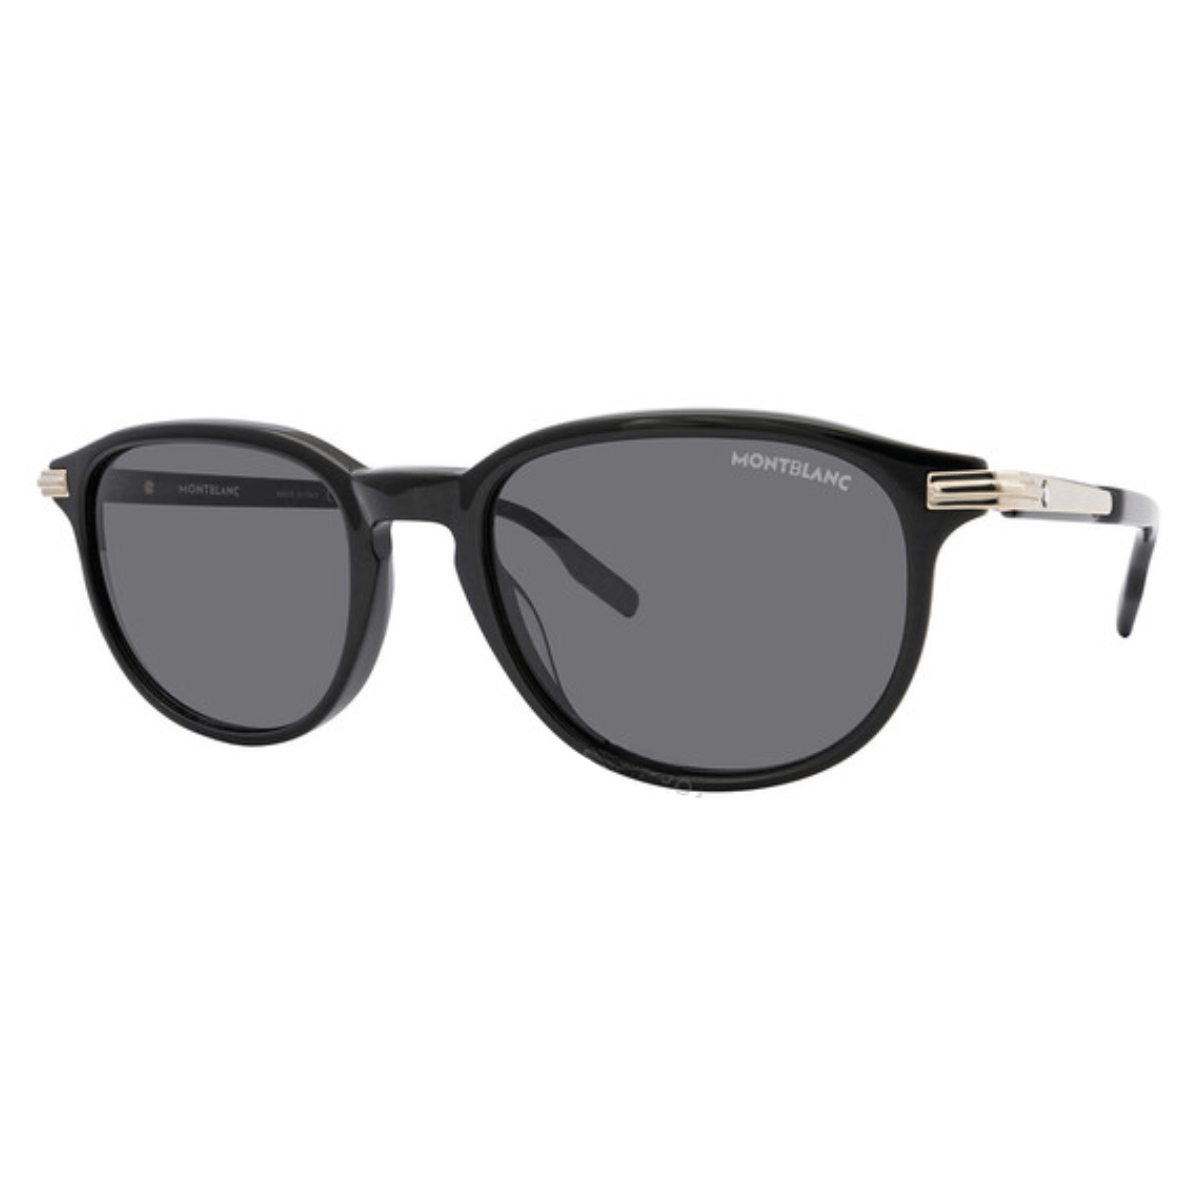 "Discover Mont Blanc MB0276S Sunglasses for Men & Women at Optorium. Stylish black and gold design with non-polarized grey lenses for the ultimate summer look"